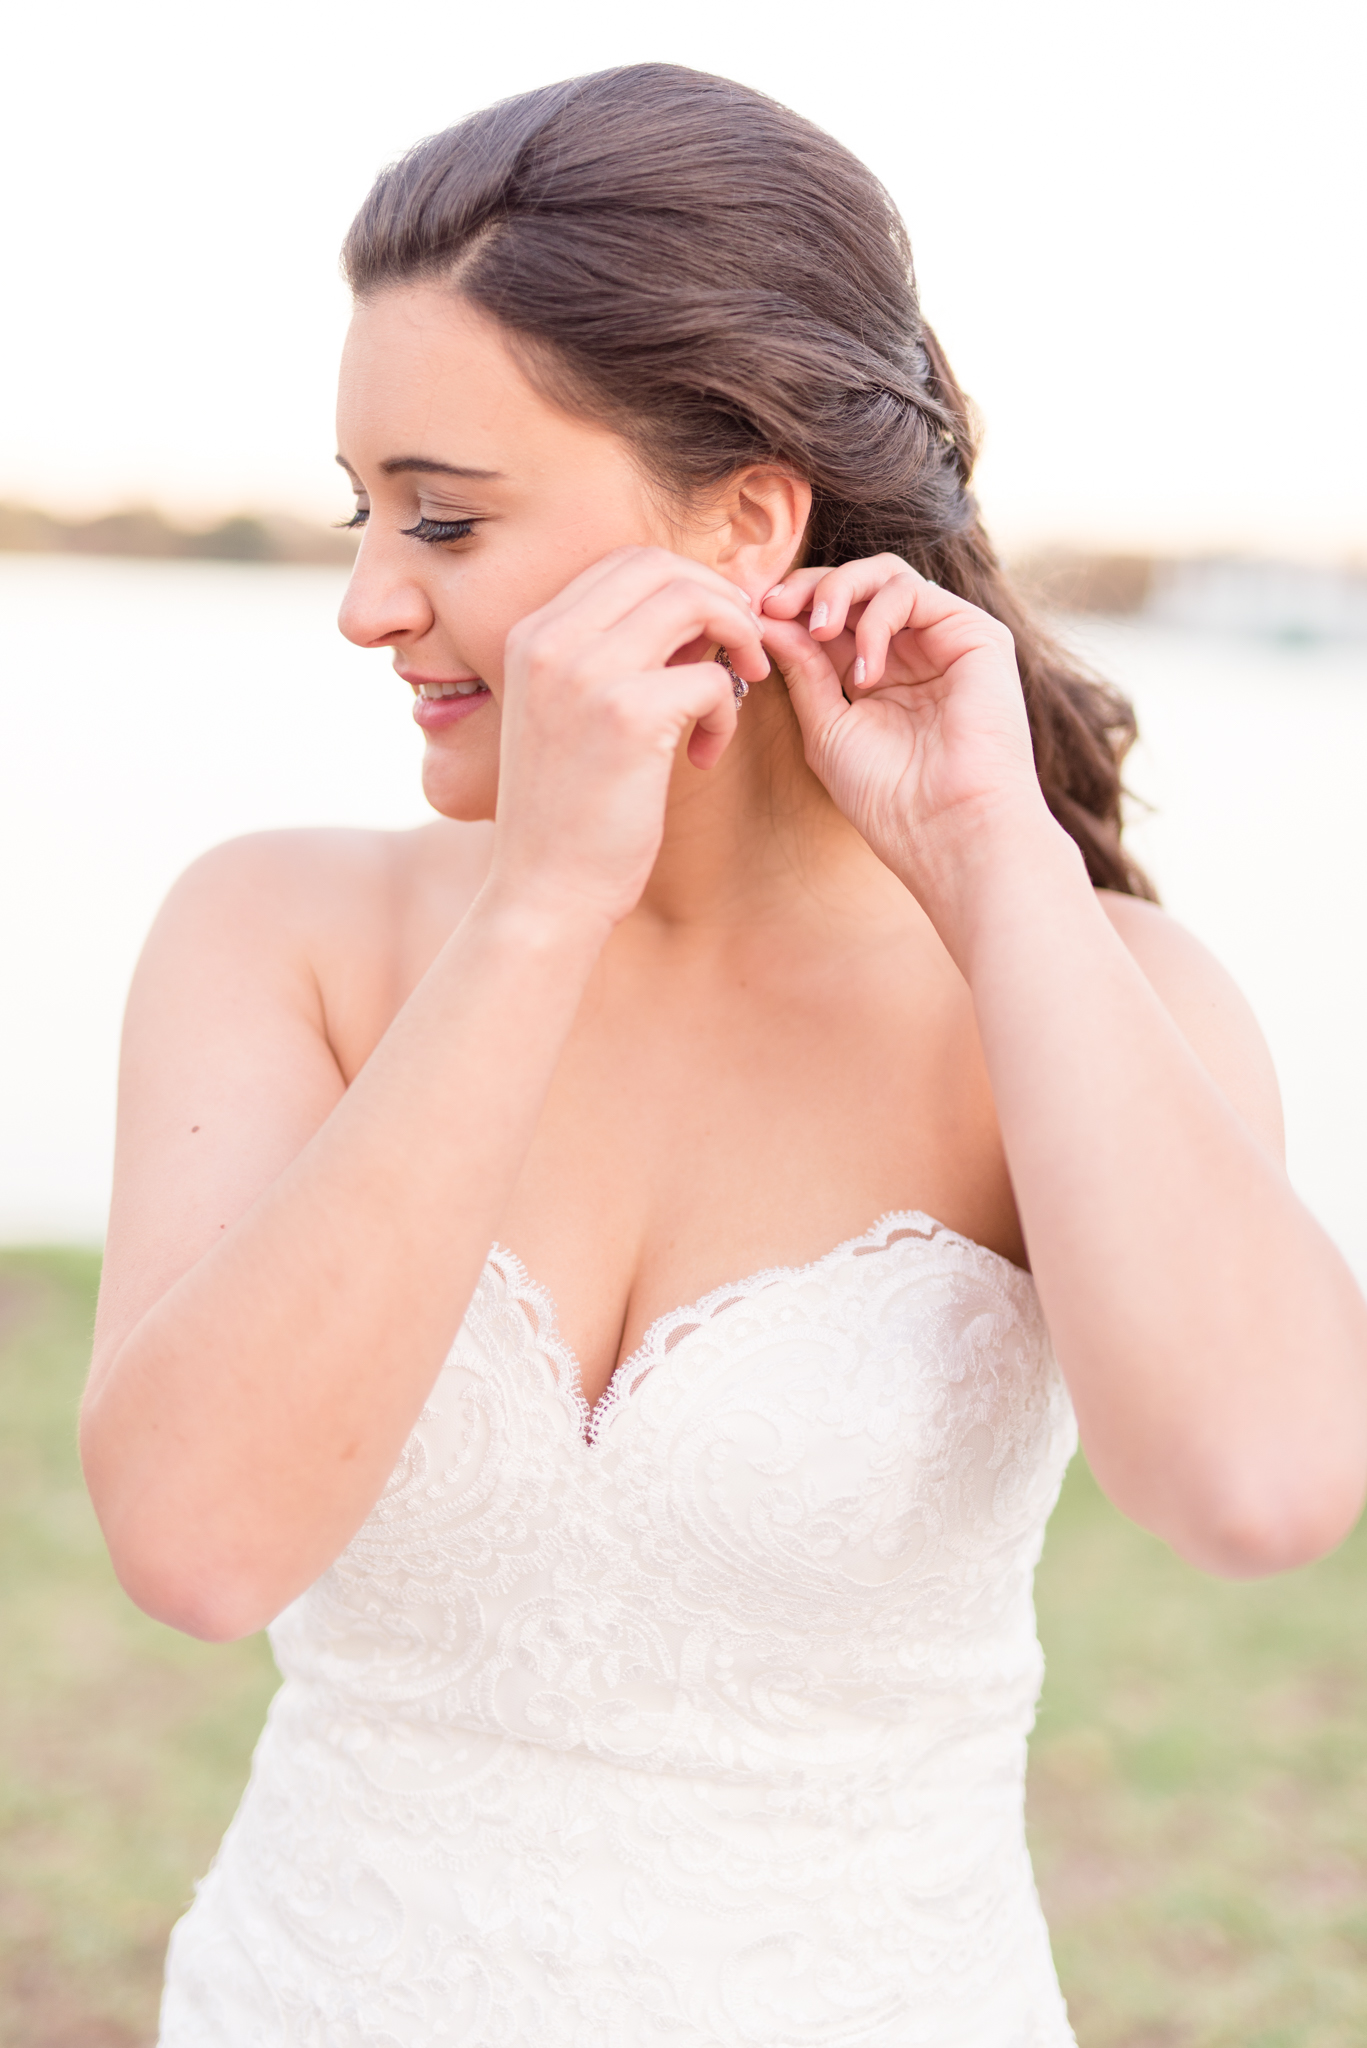 Bride puts in earring on wedding day.